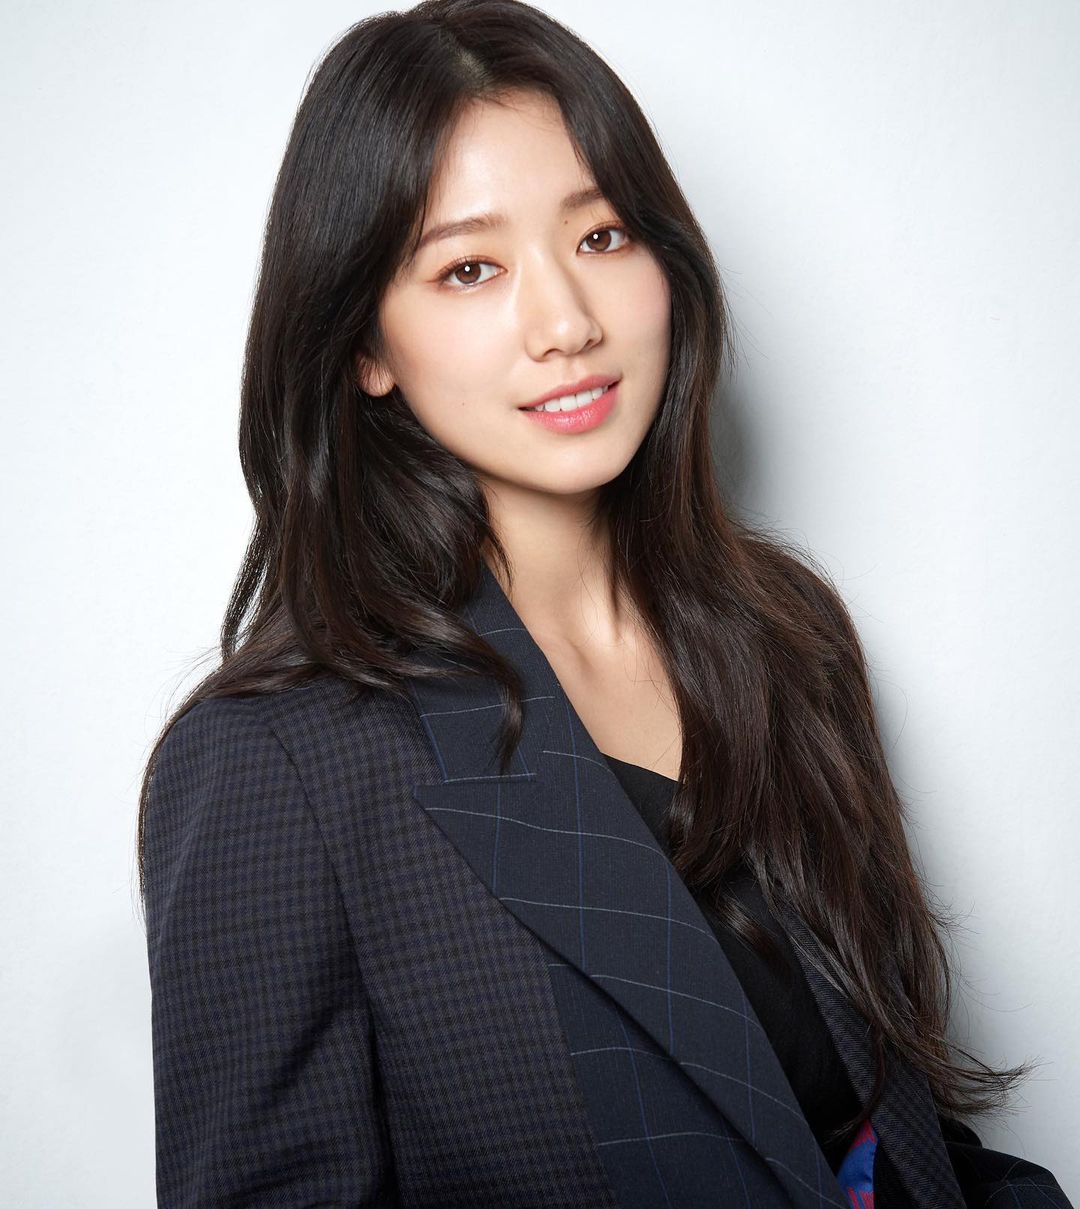 Park Shin-hye       West Age, Height, Wife, Family – Biographyprofiles